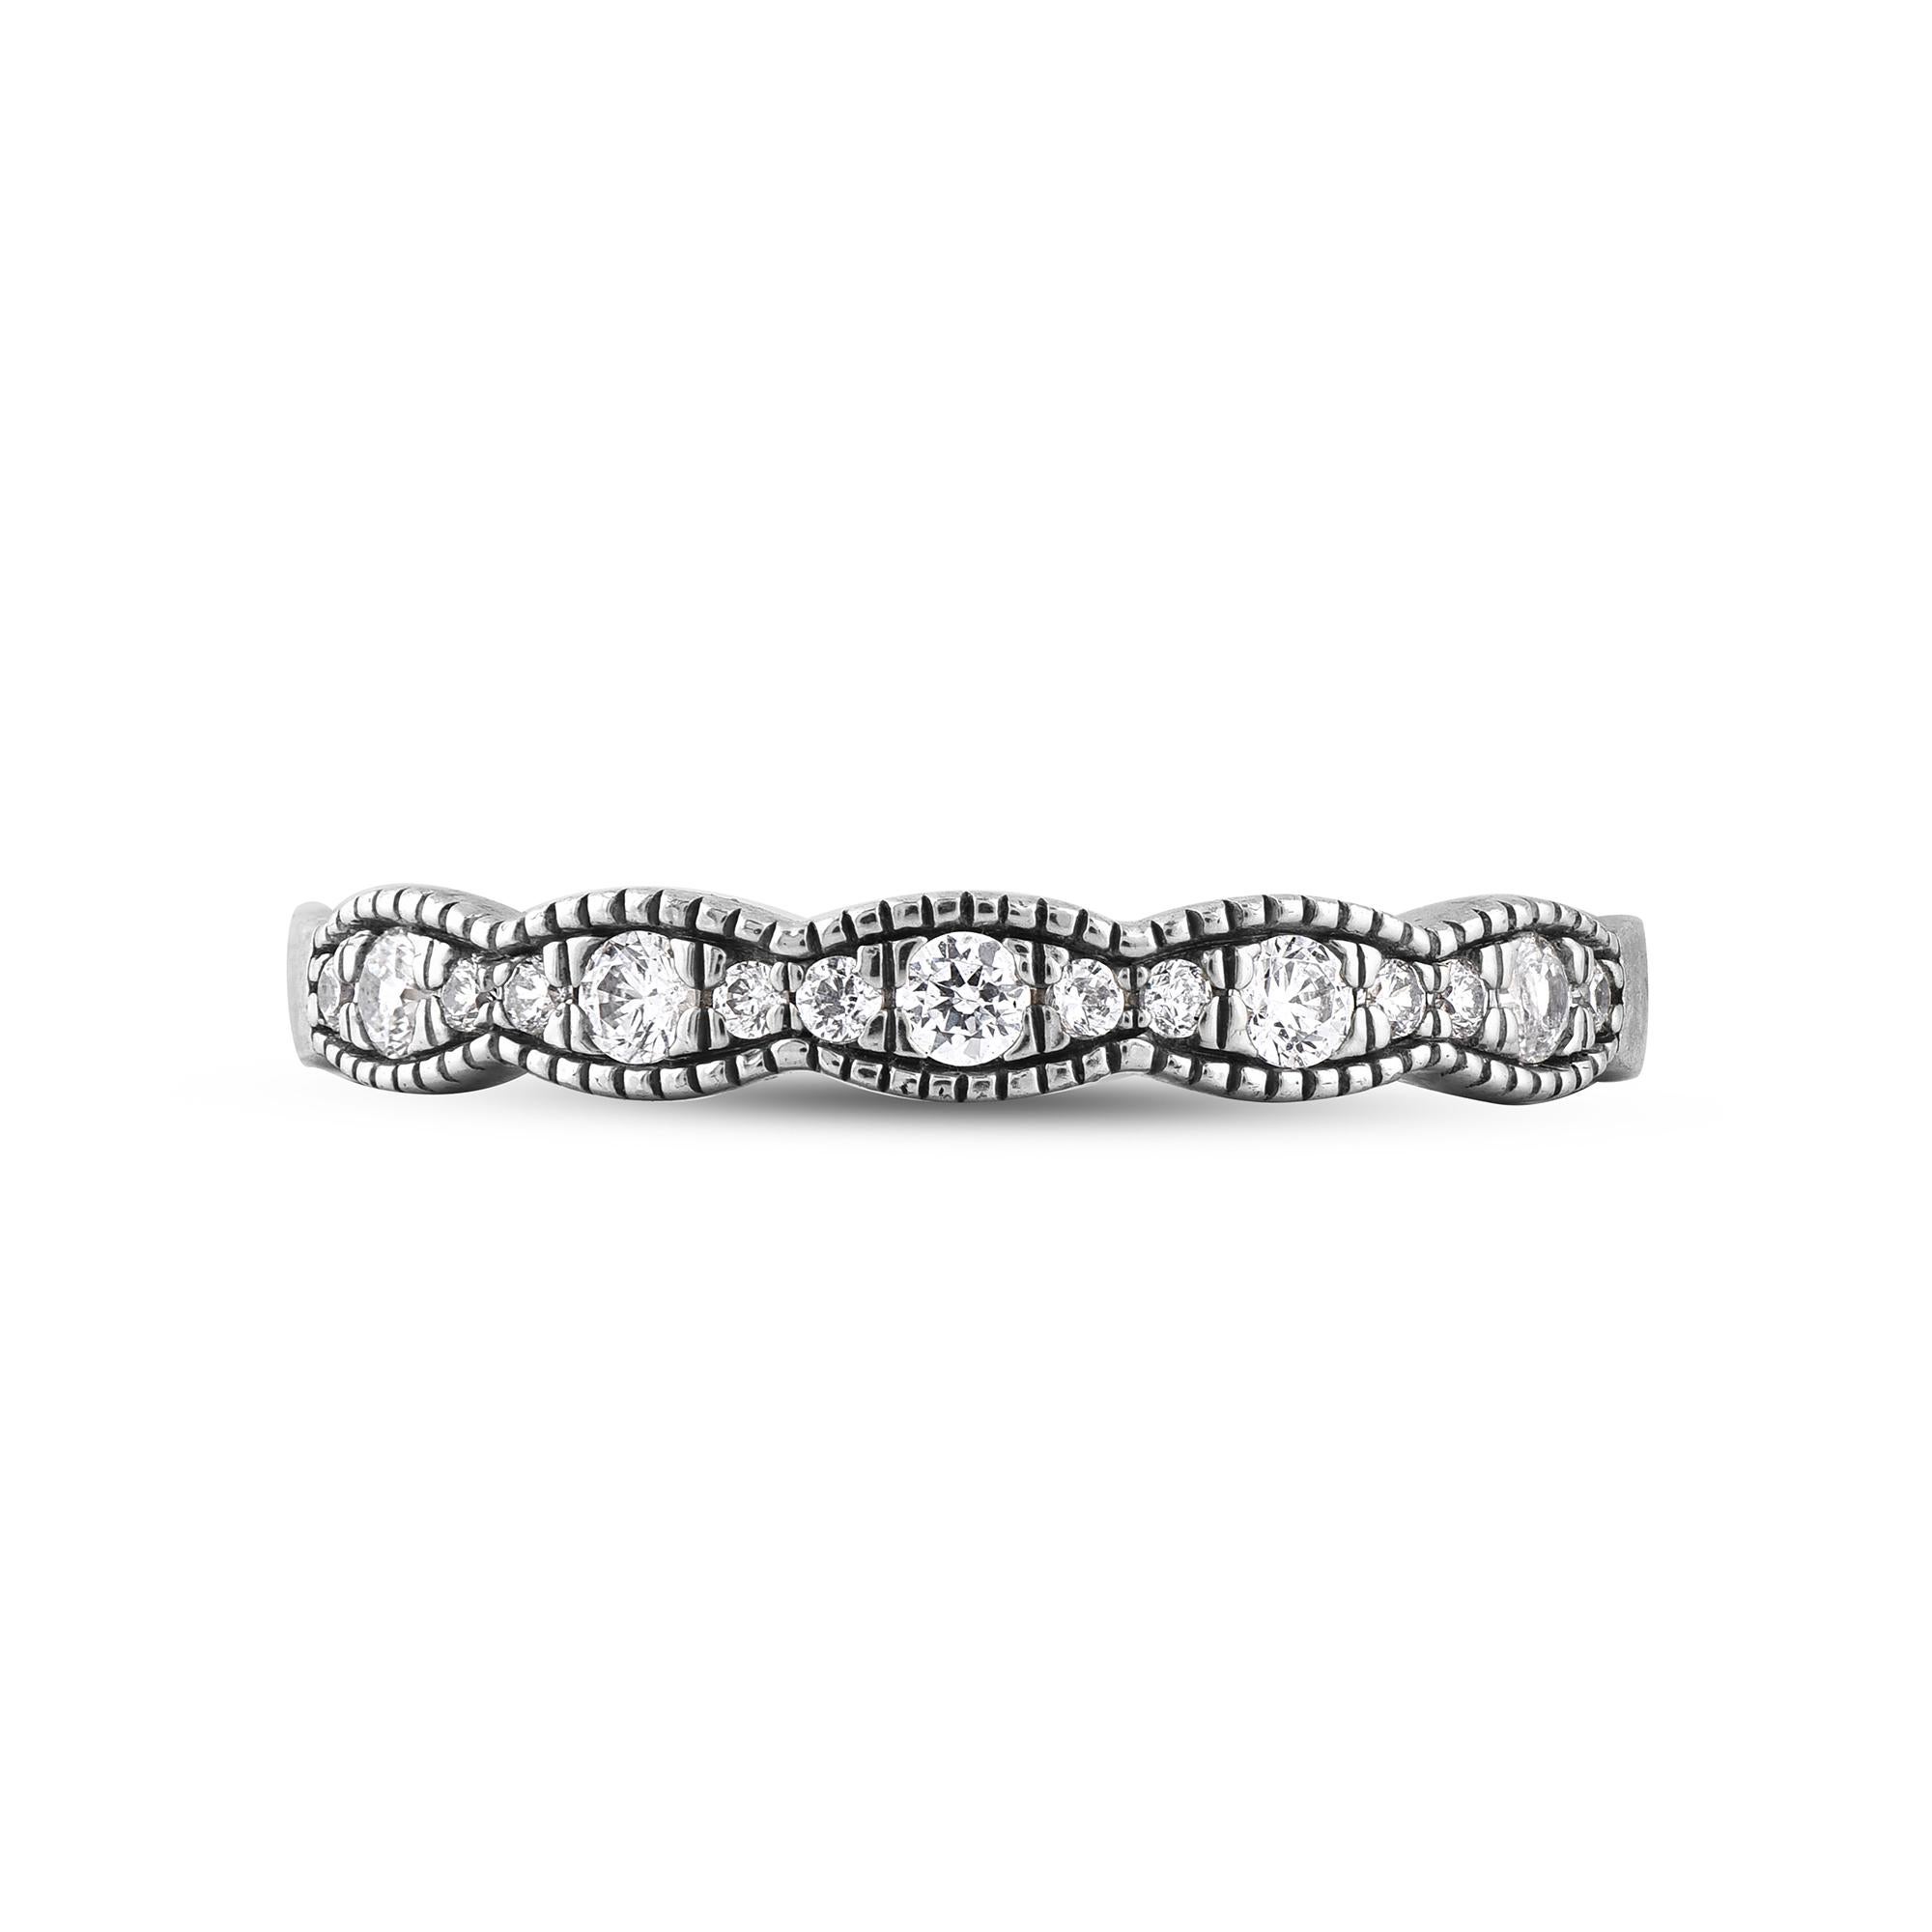 Honor your special day with this exceptional diamond band ring. This band ring features a sparkling 15 brilliant cut diamonds beautifully set in prong setting. The total diamond weight is 0.25 Carat. The diamonds are graded as H-I color and I2